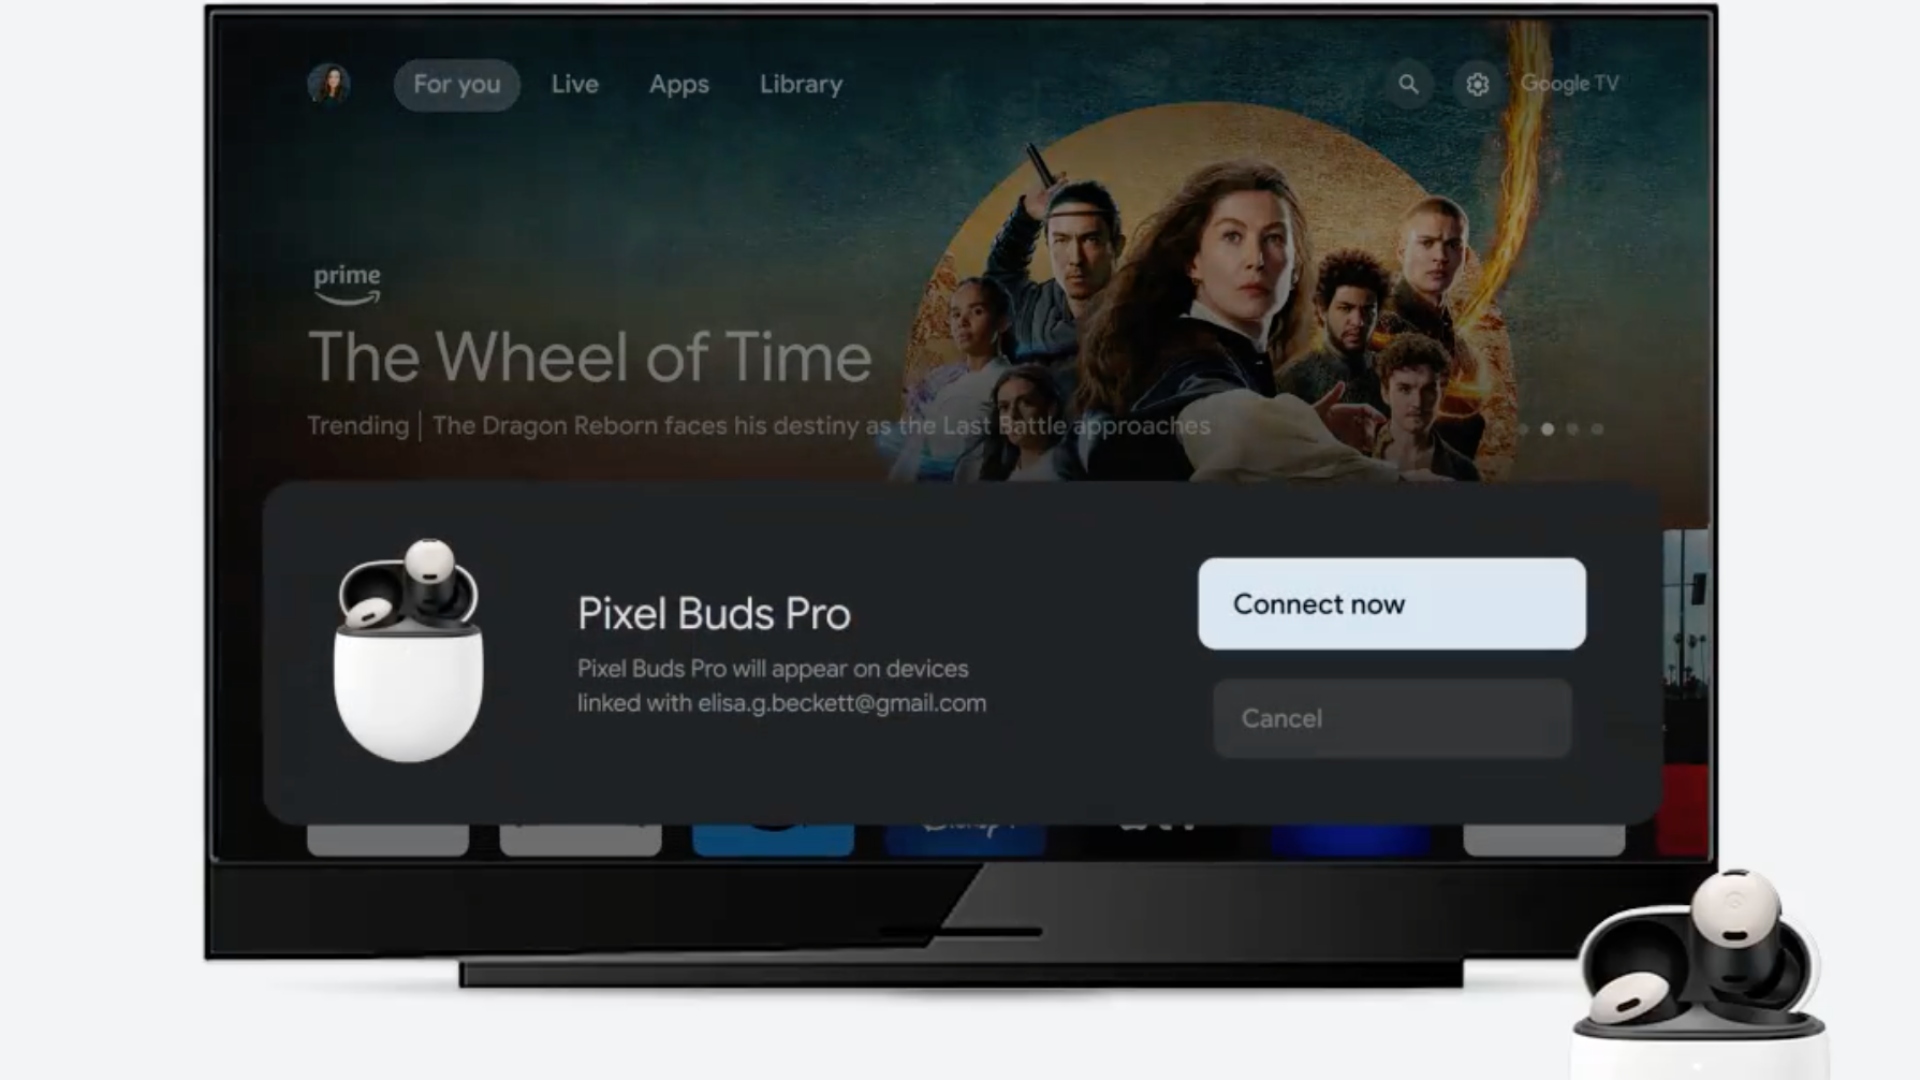 Fast Pair is rolling out widely to more Google TV devices